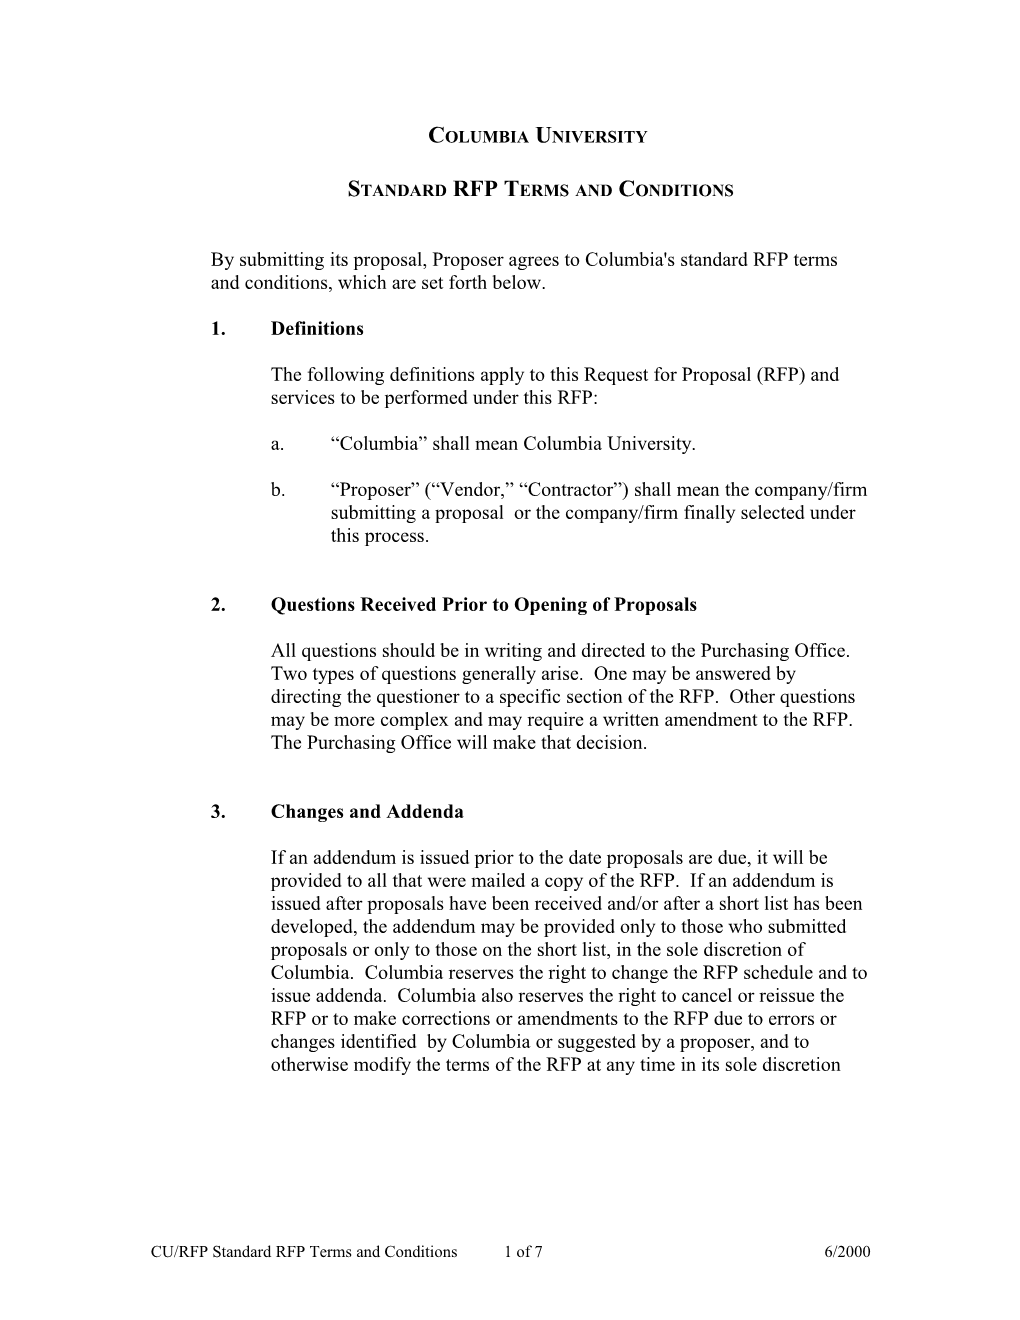 Standard RFP Terms and Conditions